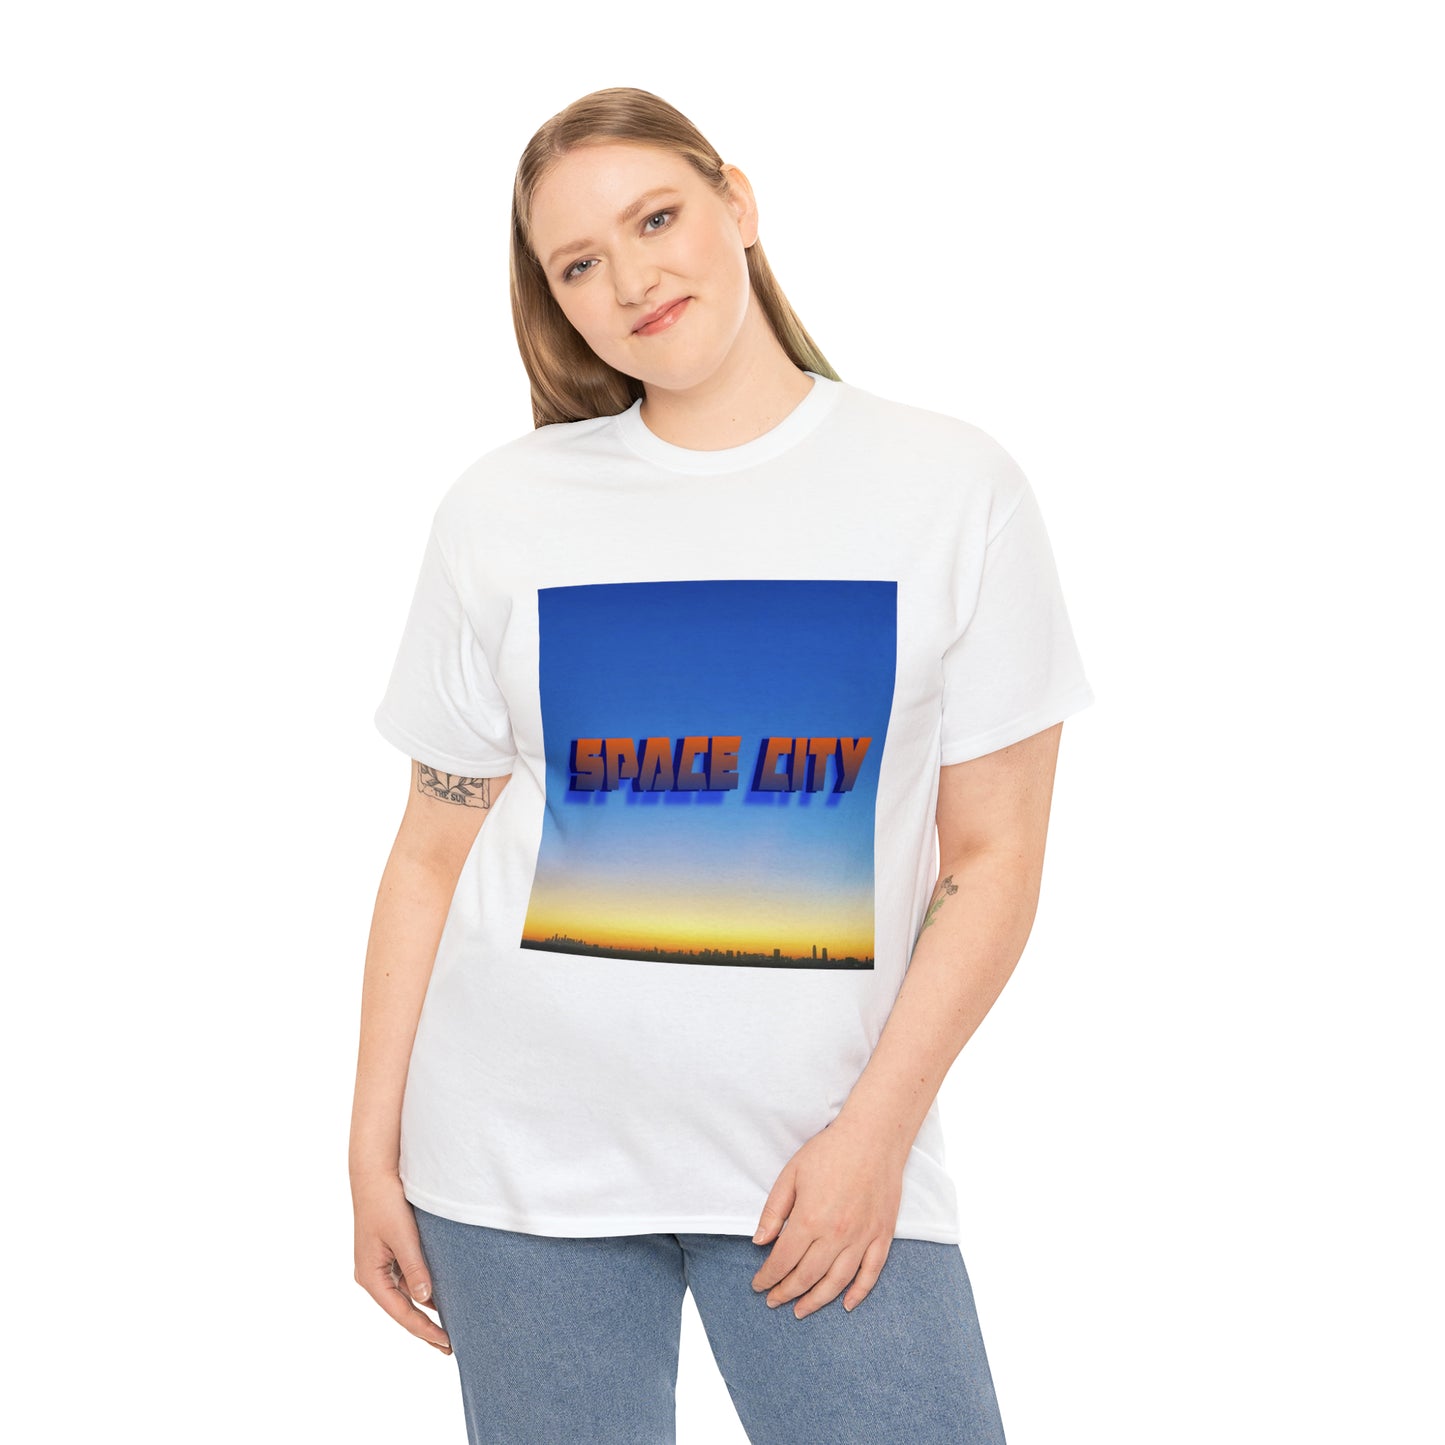 Space City Skyline - Hurts Shirts Collection